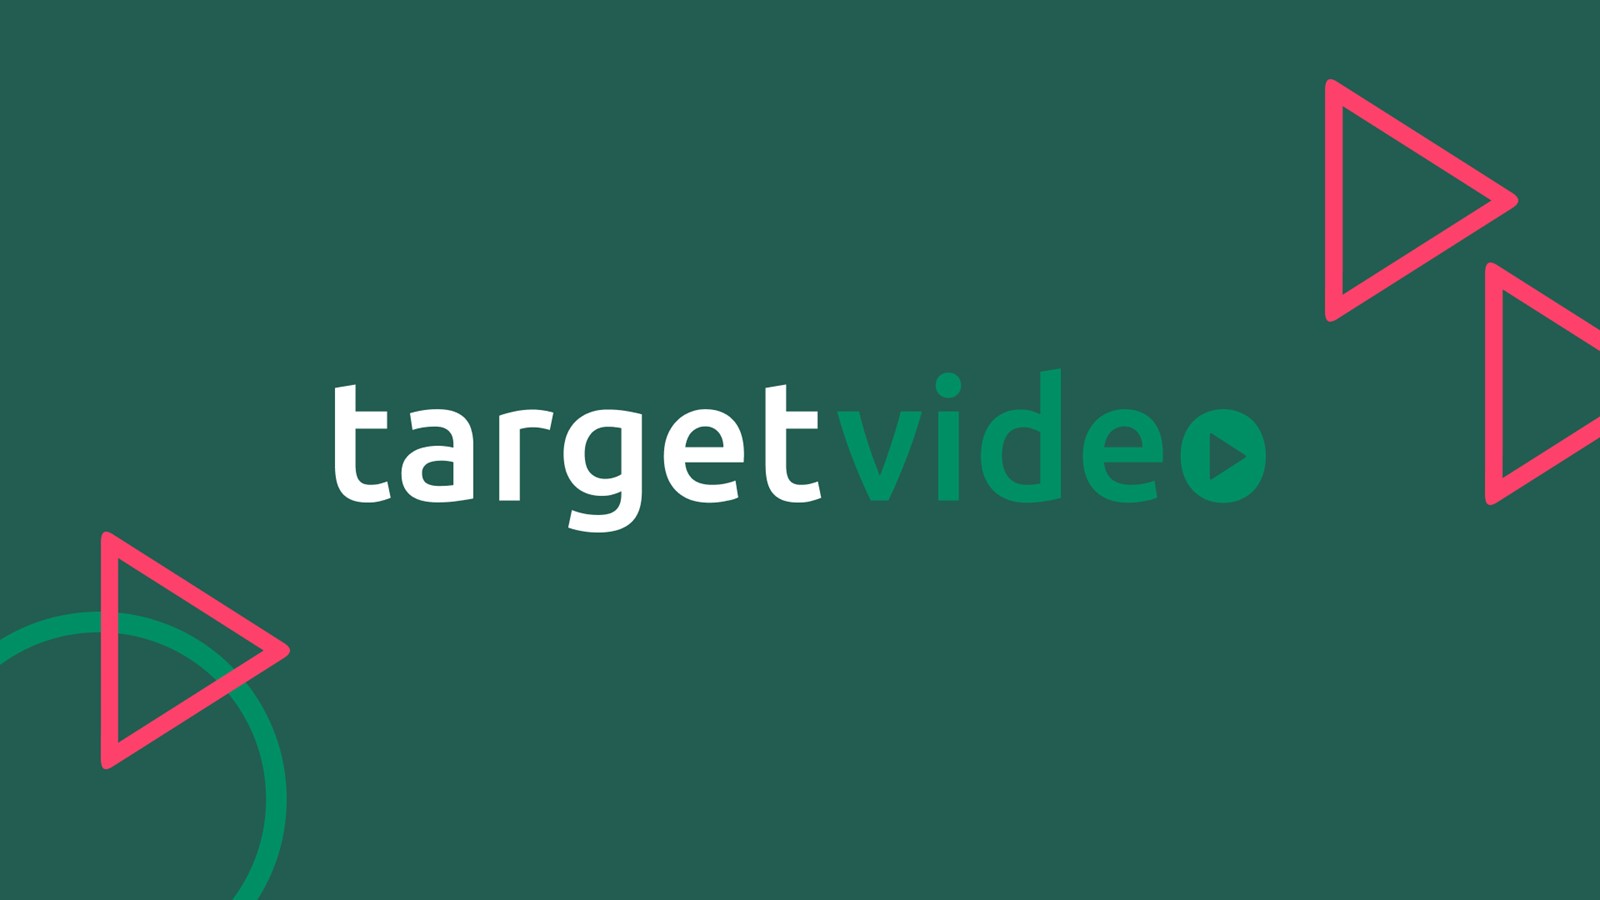 Brid.TV and TargetVideo Unite Forces to Enhance Video Publishing